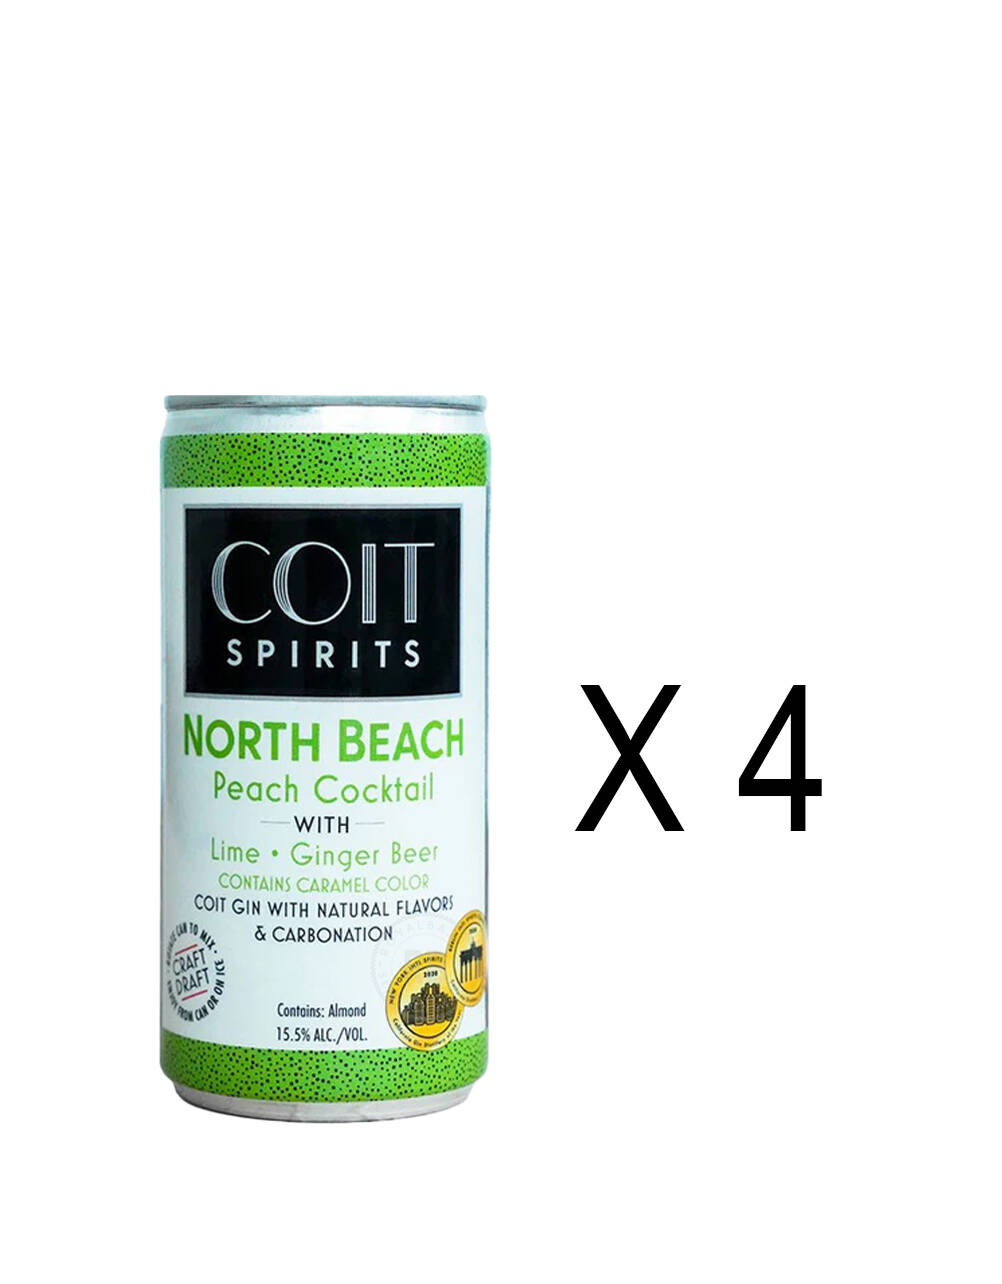 Coit Spirits North Beach Peach Cocktail with Lime and Ginger Beer (4 Pack) x 200ml